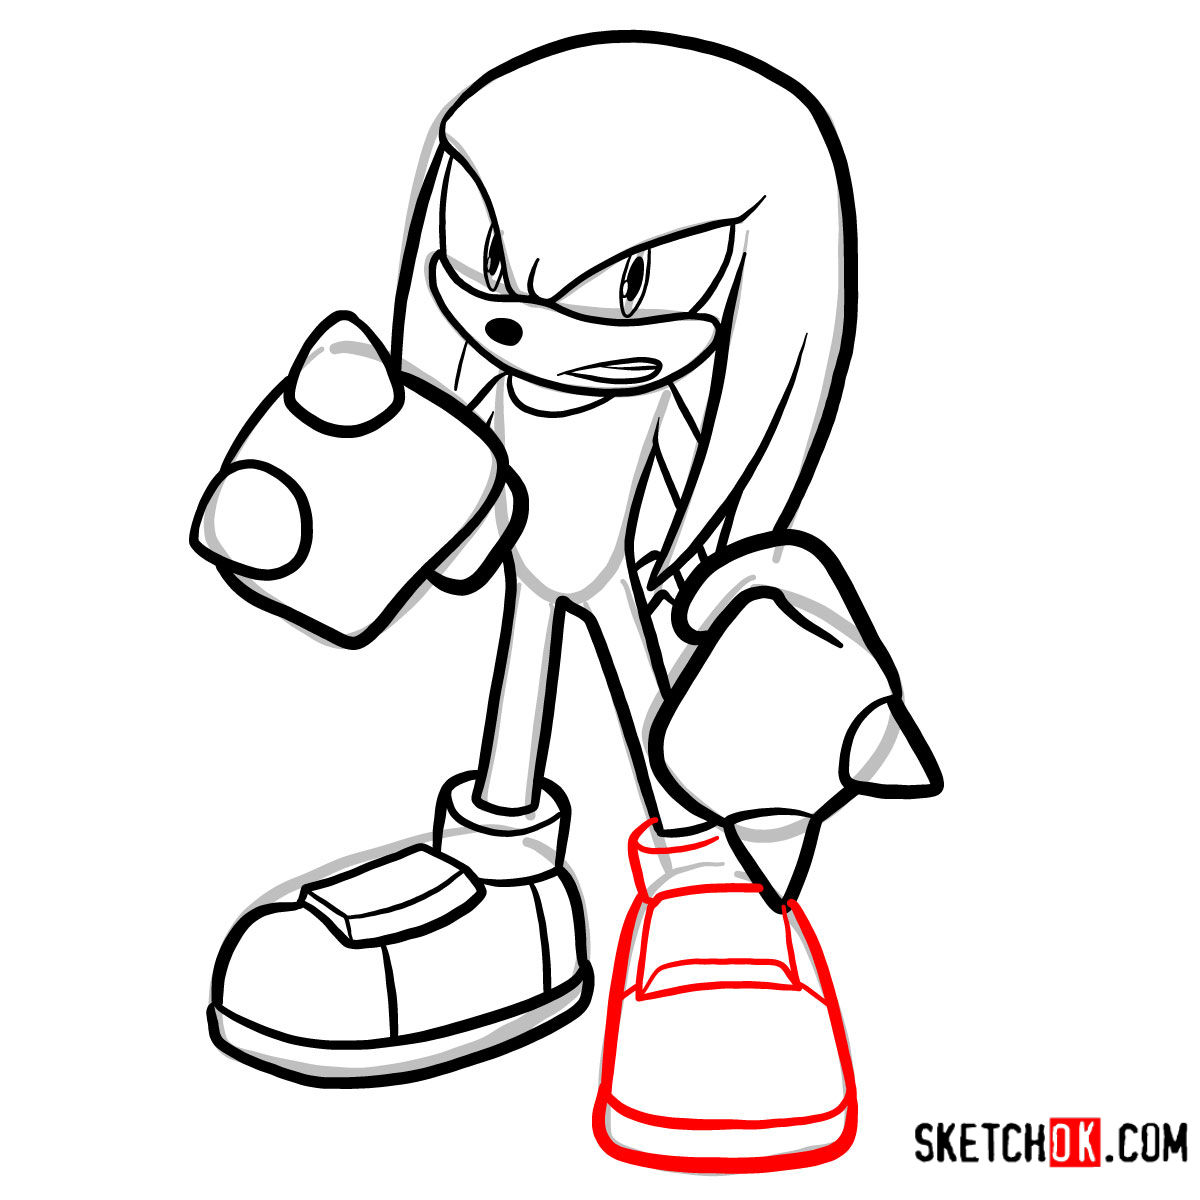 How to draw Knuckles the Echidna | Sonic the Hedgehog - step 10